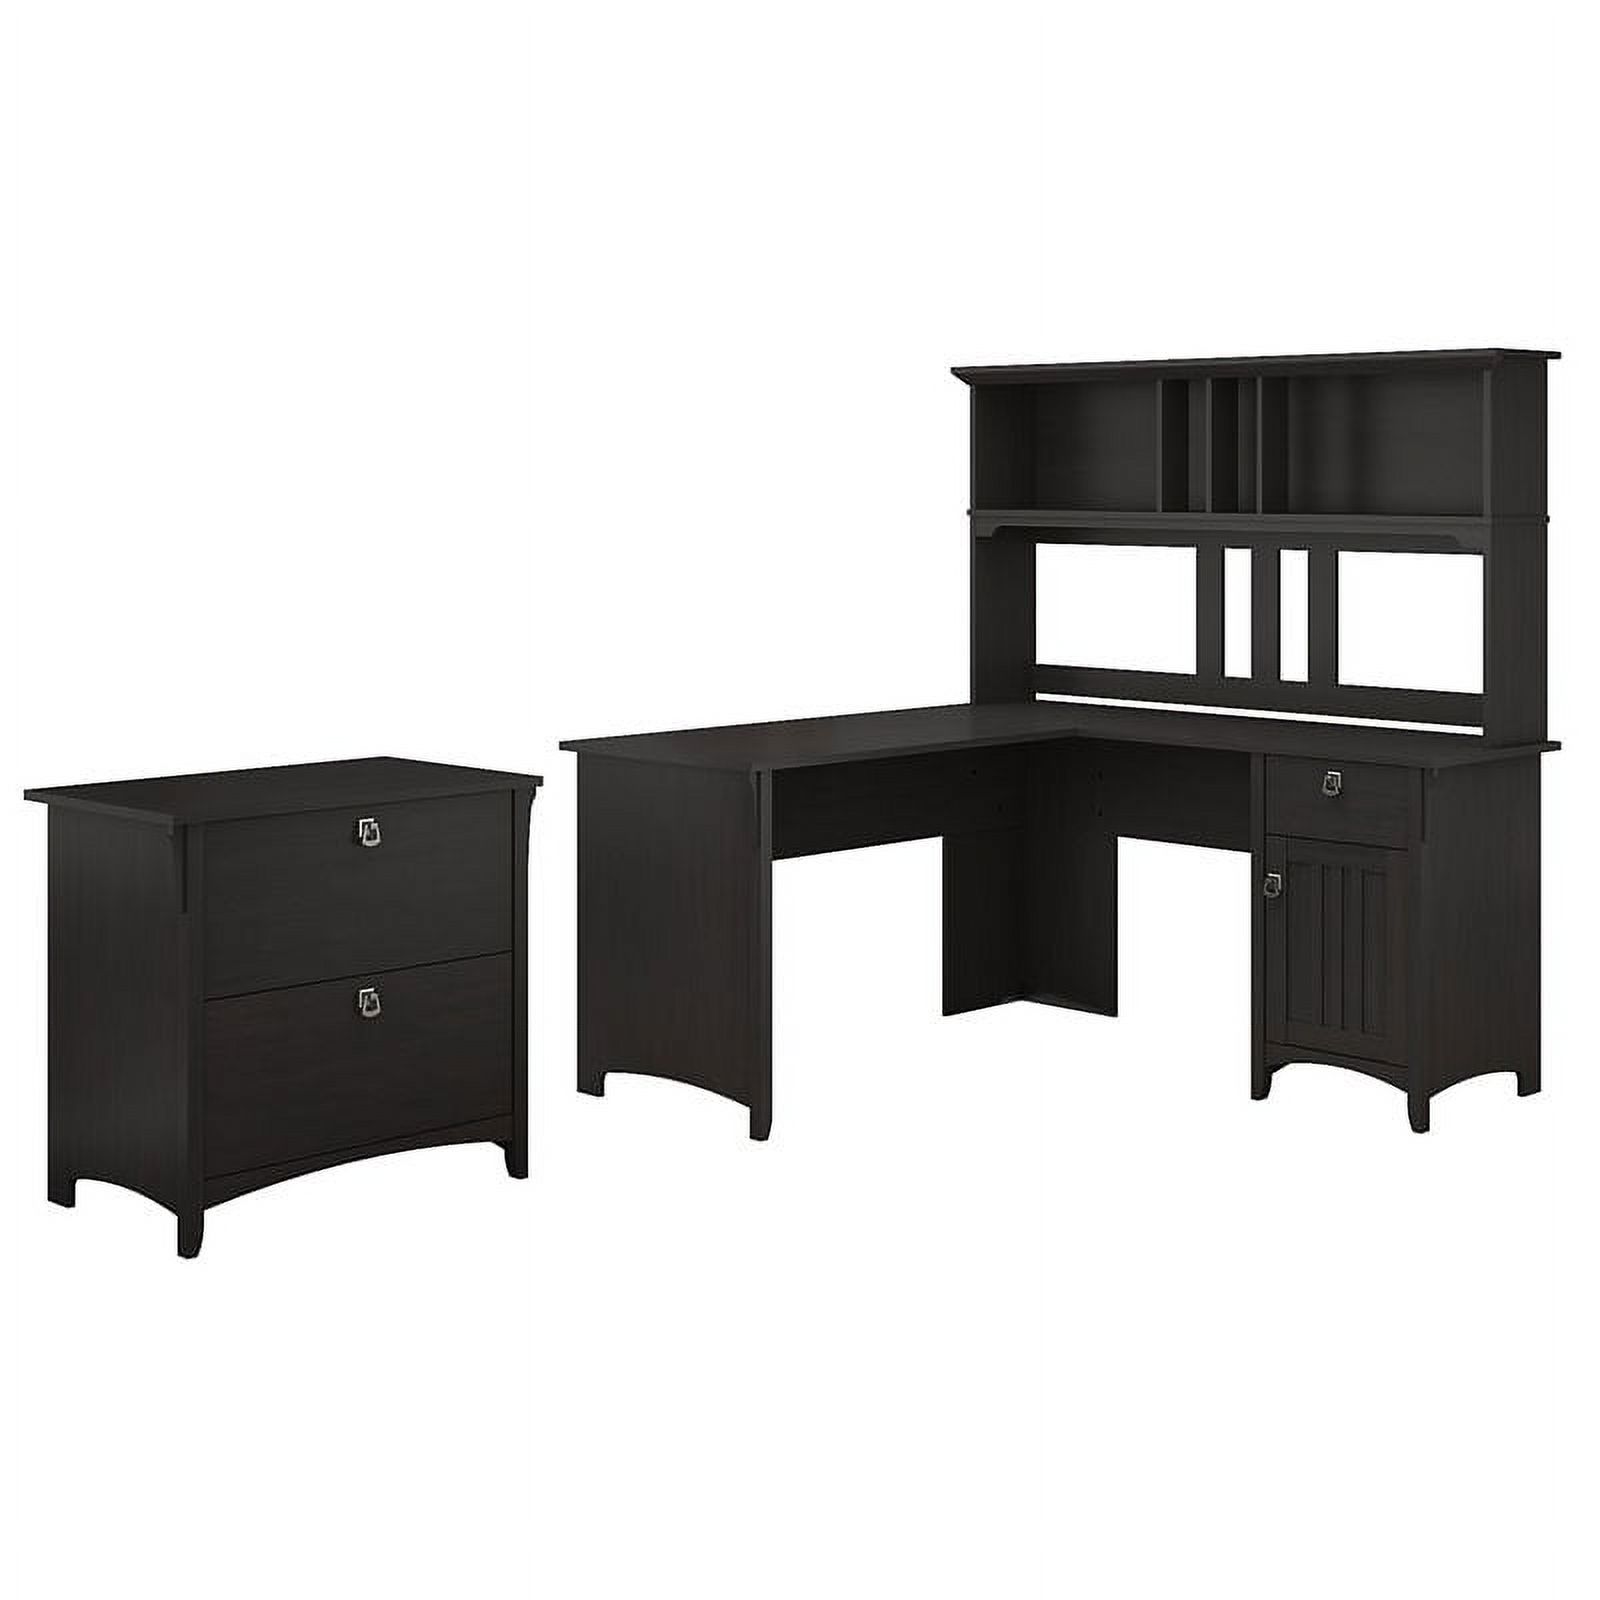 Salinas 60W L Shaped Desk with Hutch & File Cabinet in Vintage Black - image 1 of 7